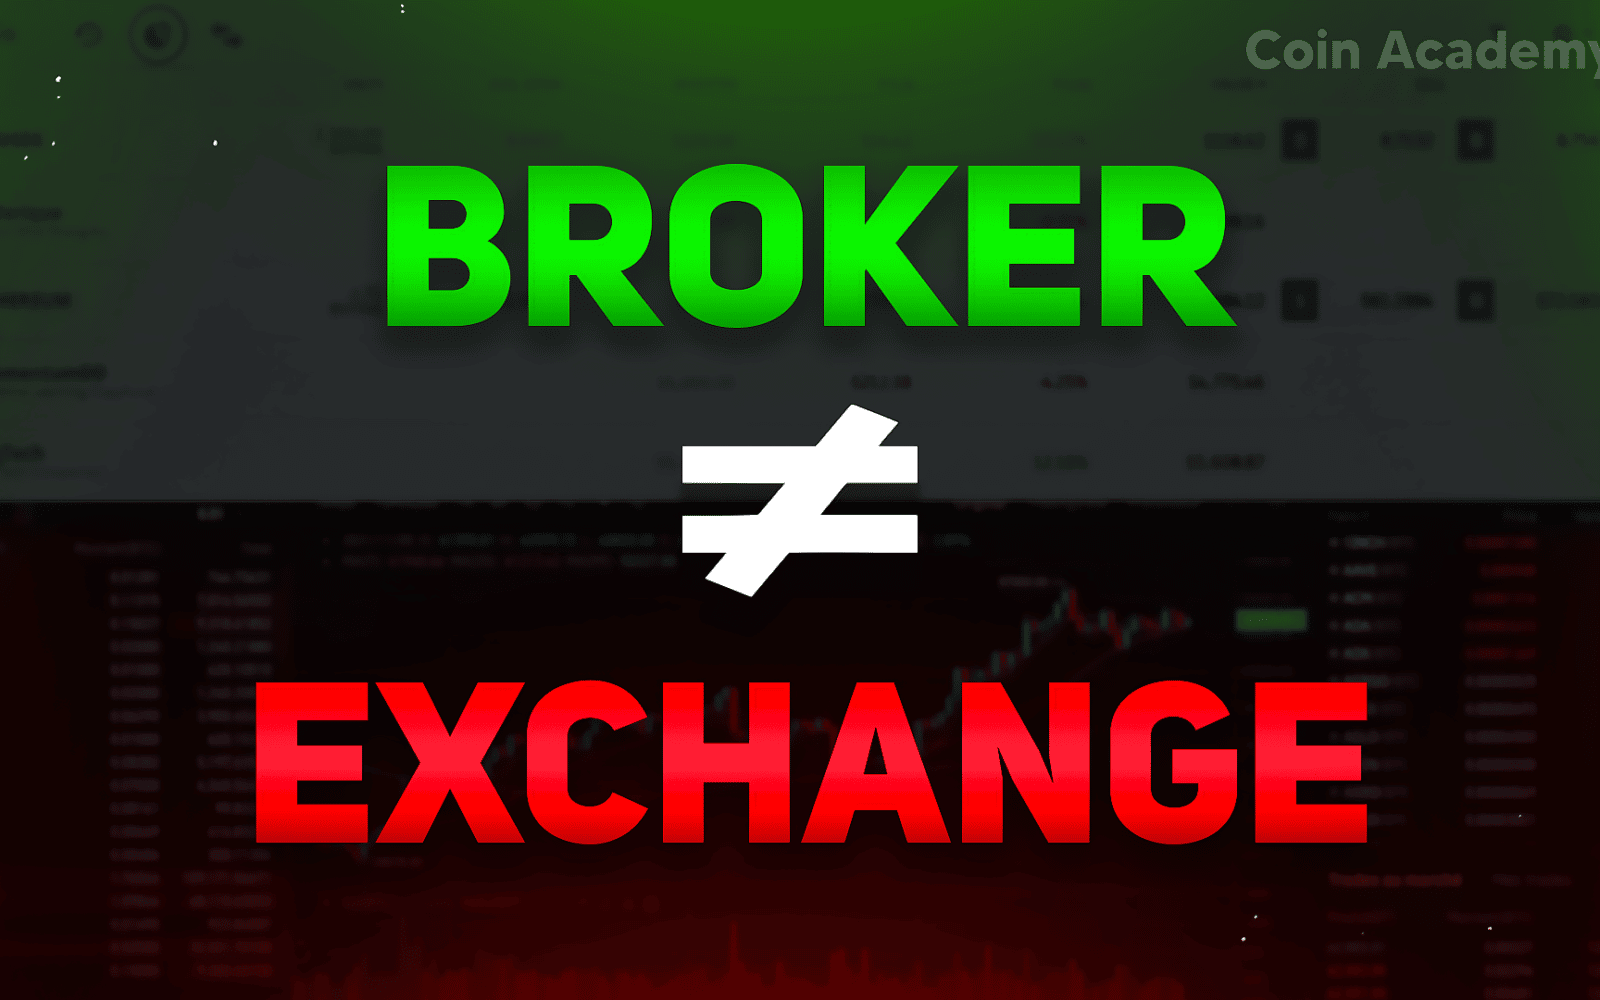 difference broker courtier exchange